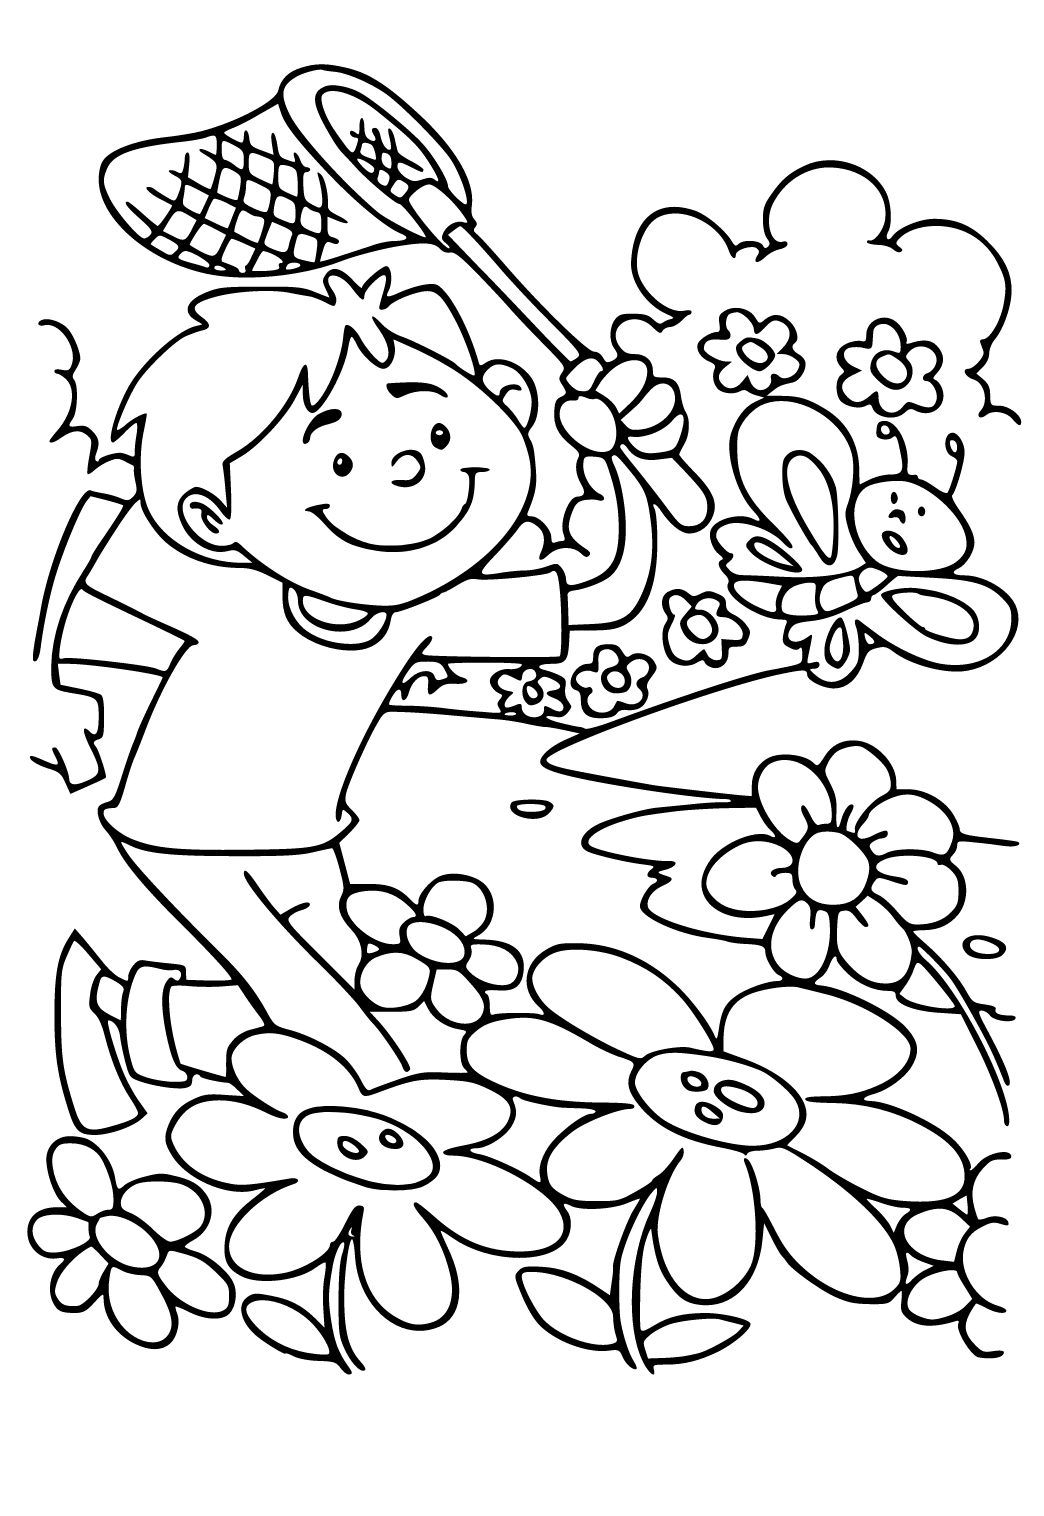 Free printable spring nature coloring page for adults and kids